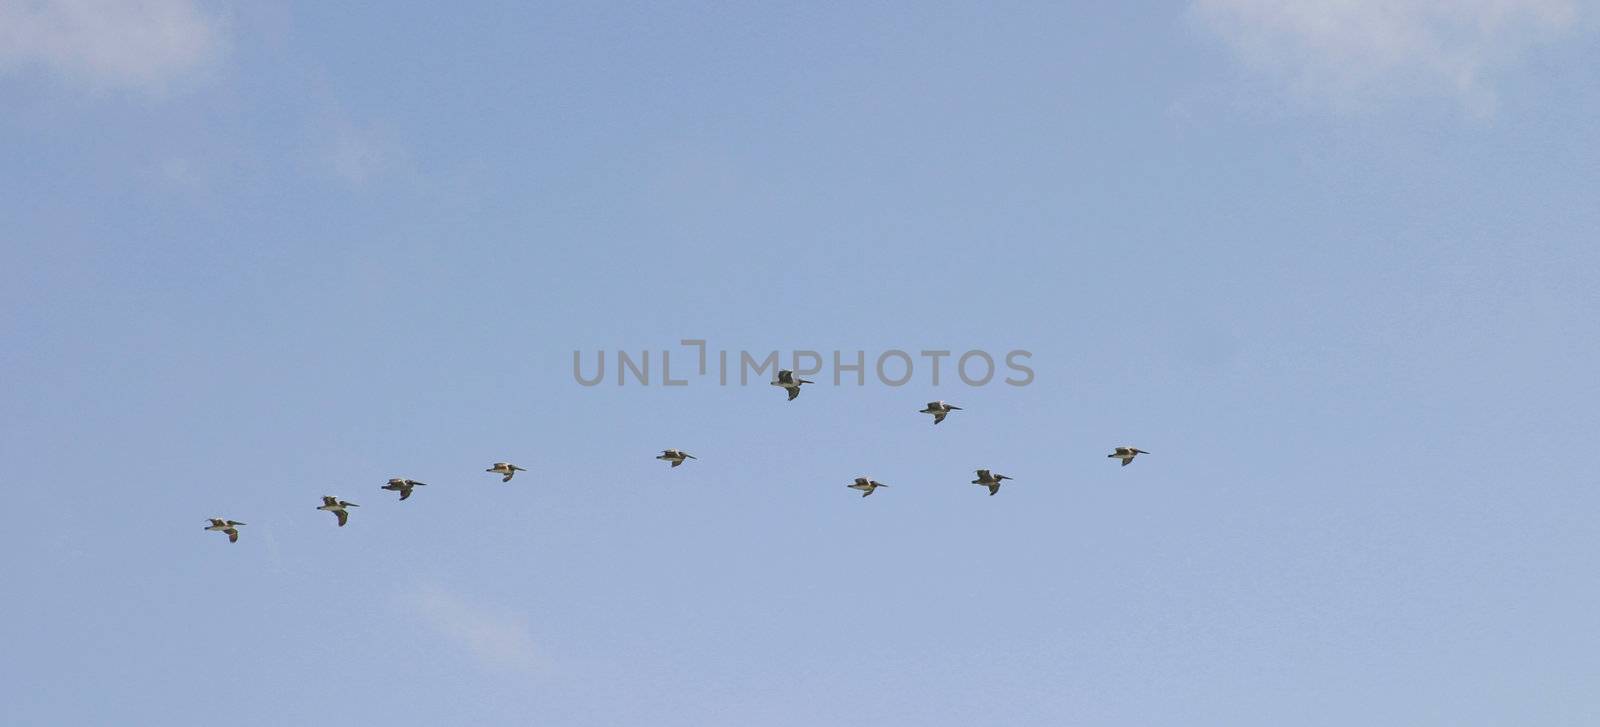 Pelicans flying in a group with a blue sky in the background.